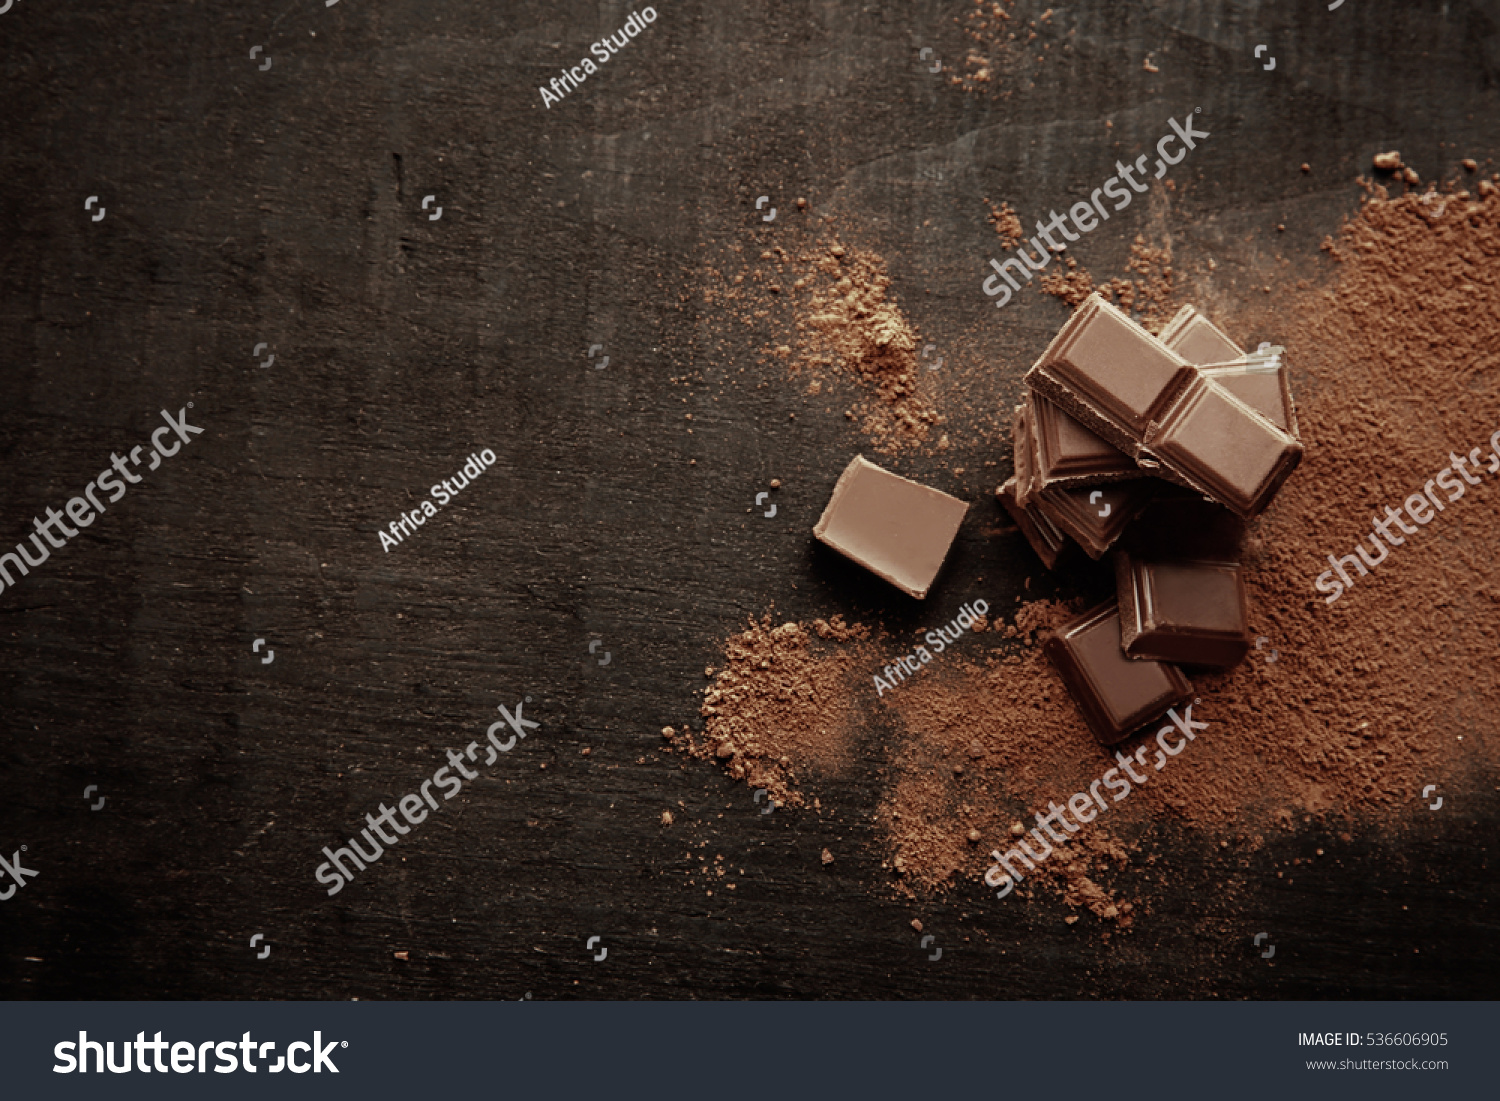 Broken chocolate pieces and cocoa powder on wooden background #536606905